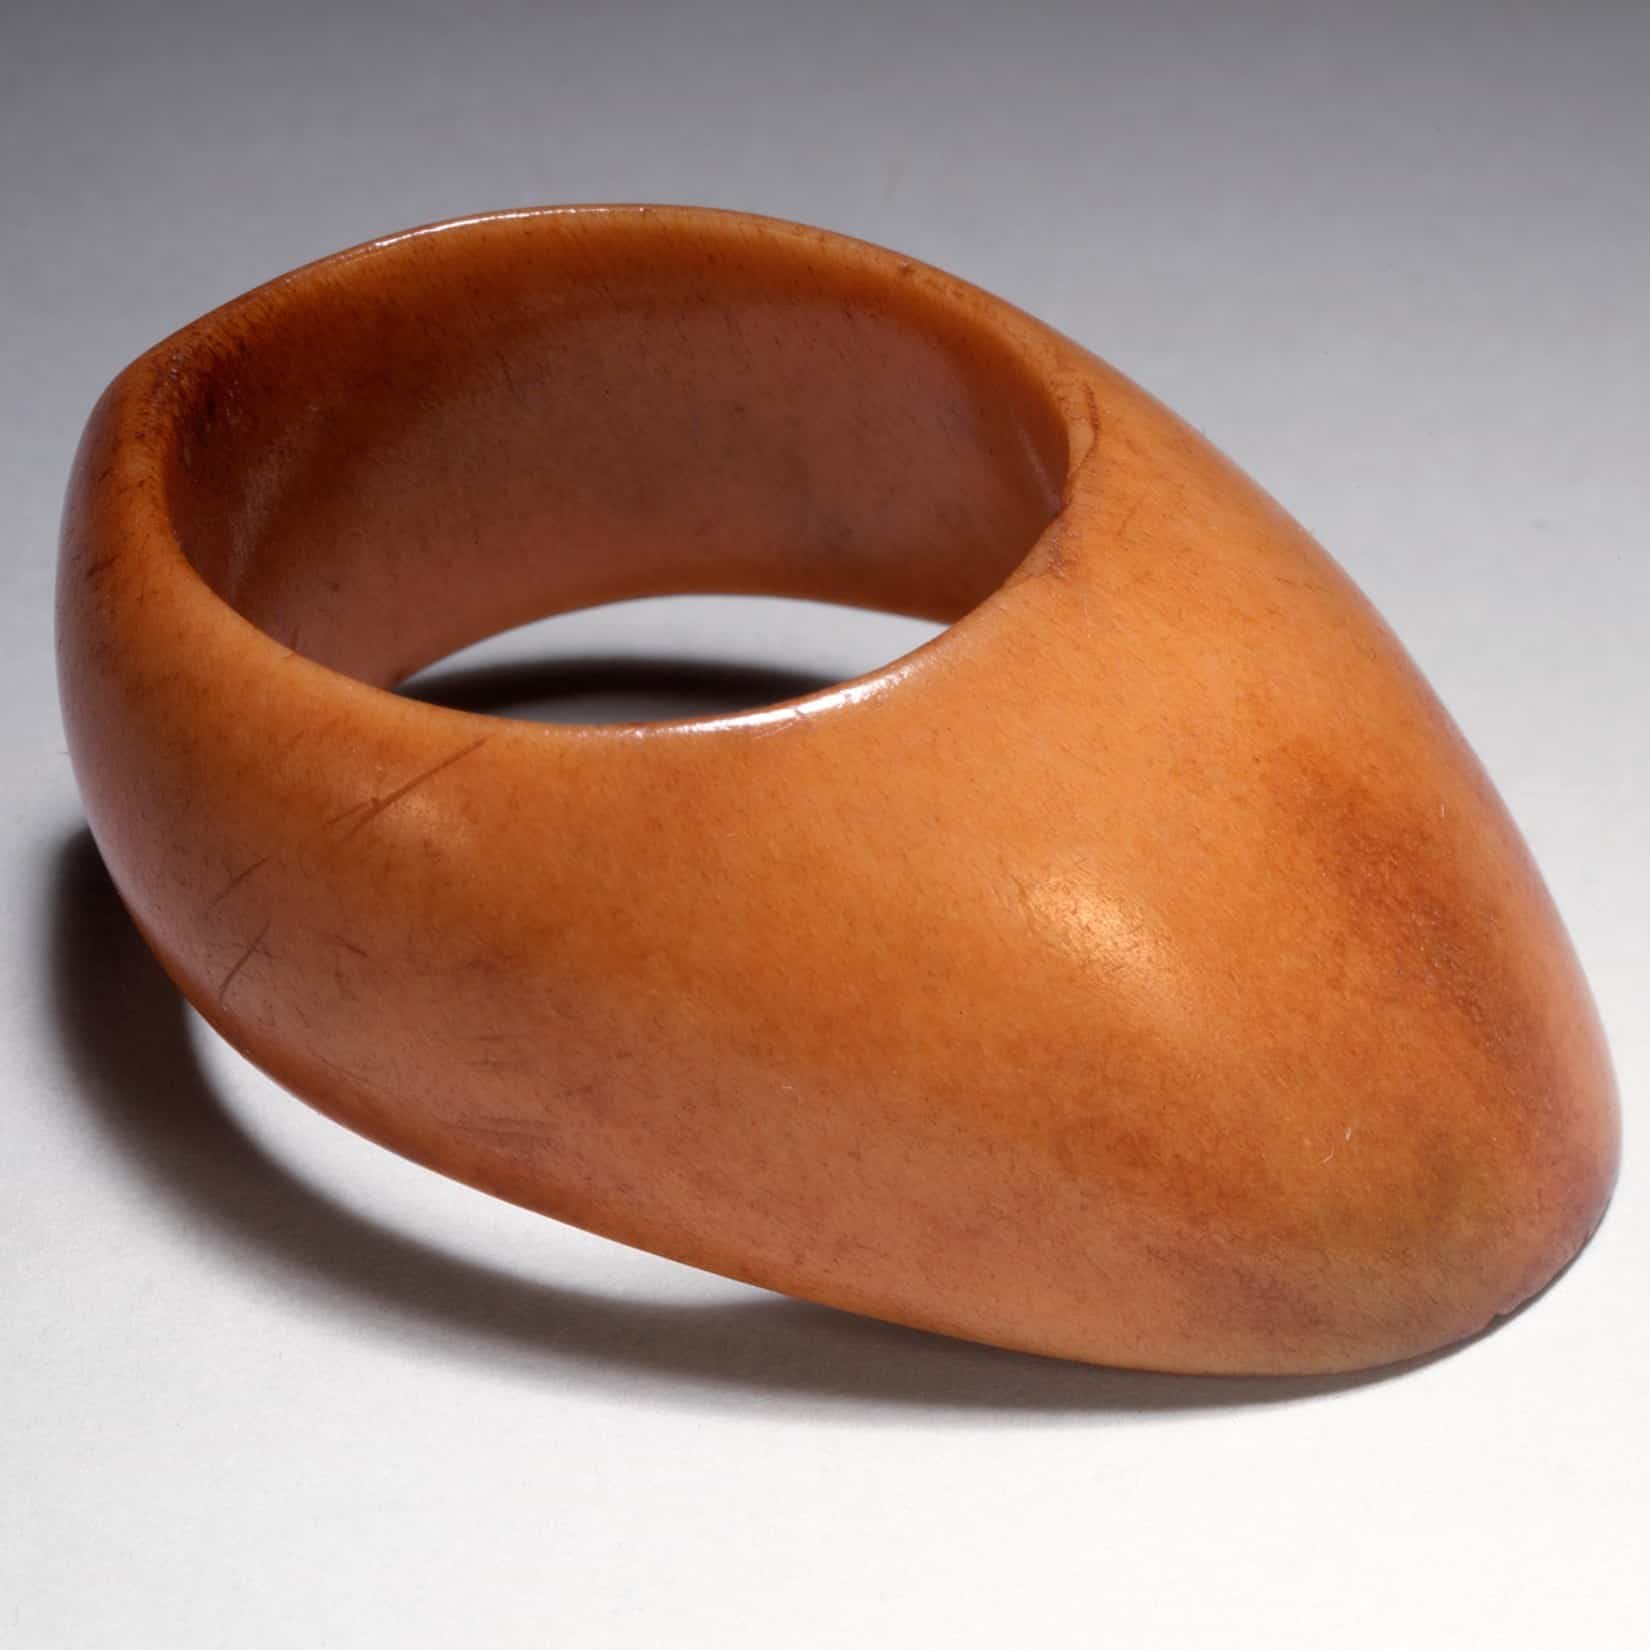 A photograph of a plain, oblong thumb ring